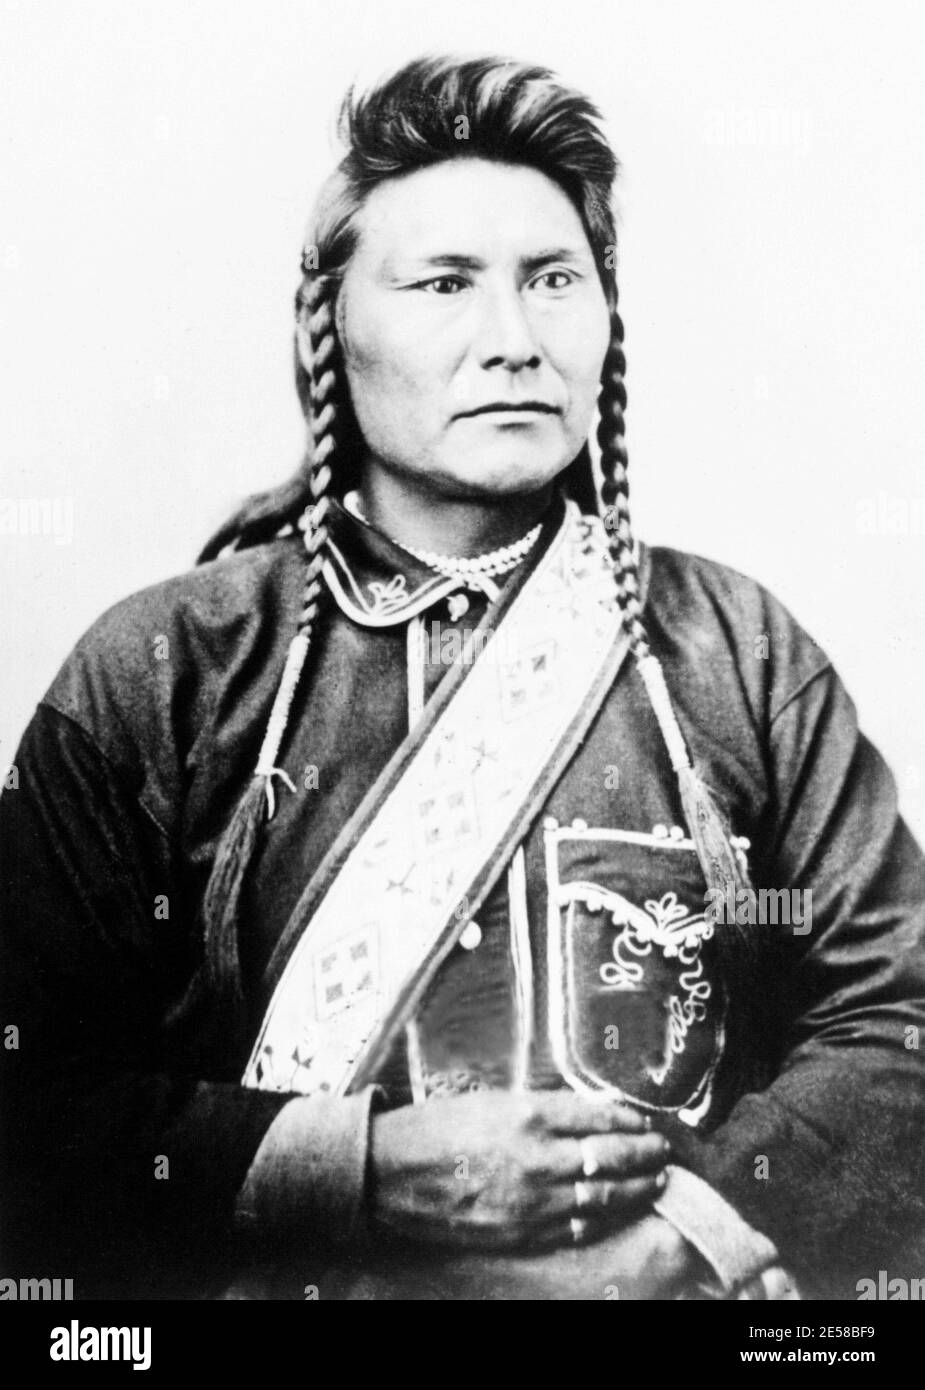 1885 c., USA  : The Chief JOSEPH , or Hin-Mah-Too-Yah ( Thunder Traveling to Loftier Mountain Heights ) was a hereditary chief of the NEZ PERCE .Photographed by DAVID F. BARRY .  In 1877 , he surrendered with these now-famous words : ' From where the sun now stands , I will fight no more forever .   - NASI BUCATI - forati - PELLEROSSA - redskin Native Americans - Indian - indians - indiano d' America - indiani - EPOPEA del WEST - trecce - portrait - ritratto - perle - collana - pearl - pearls necklace - perla  - CAPO GIUSEPPE ----  Archivio GBB Stock Photo